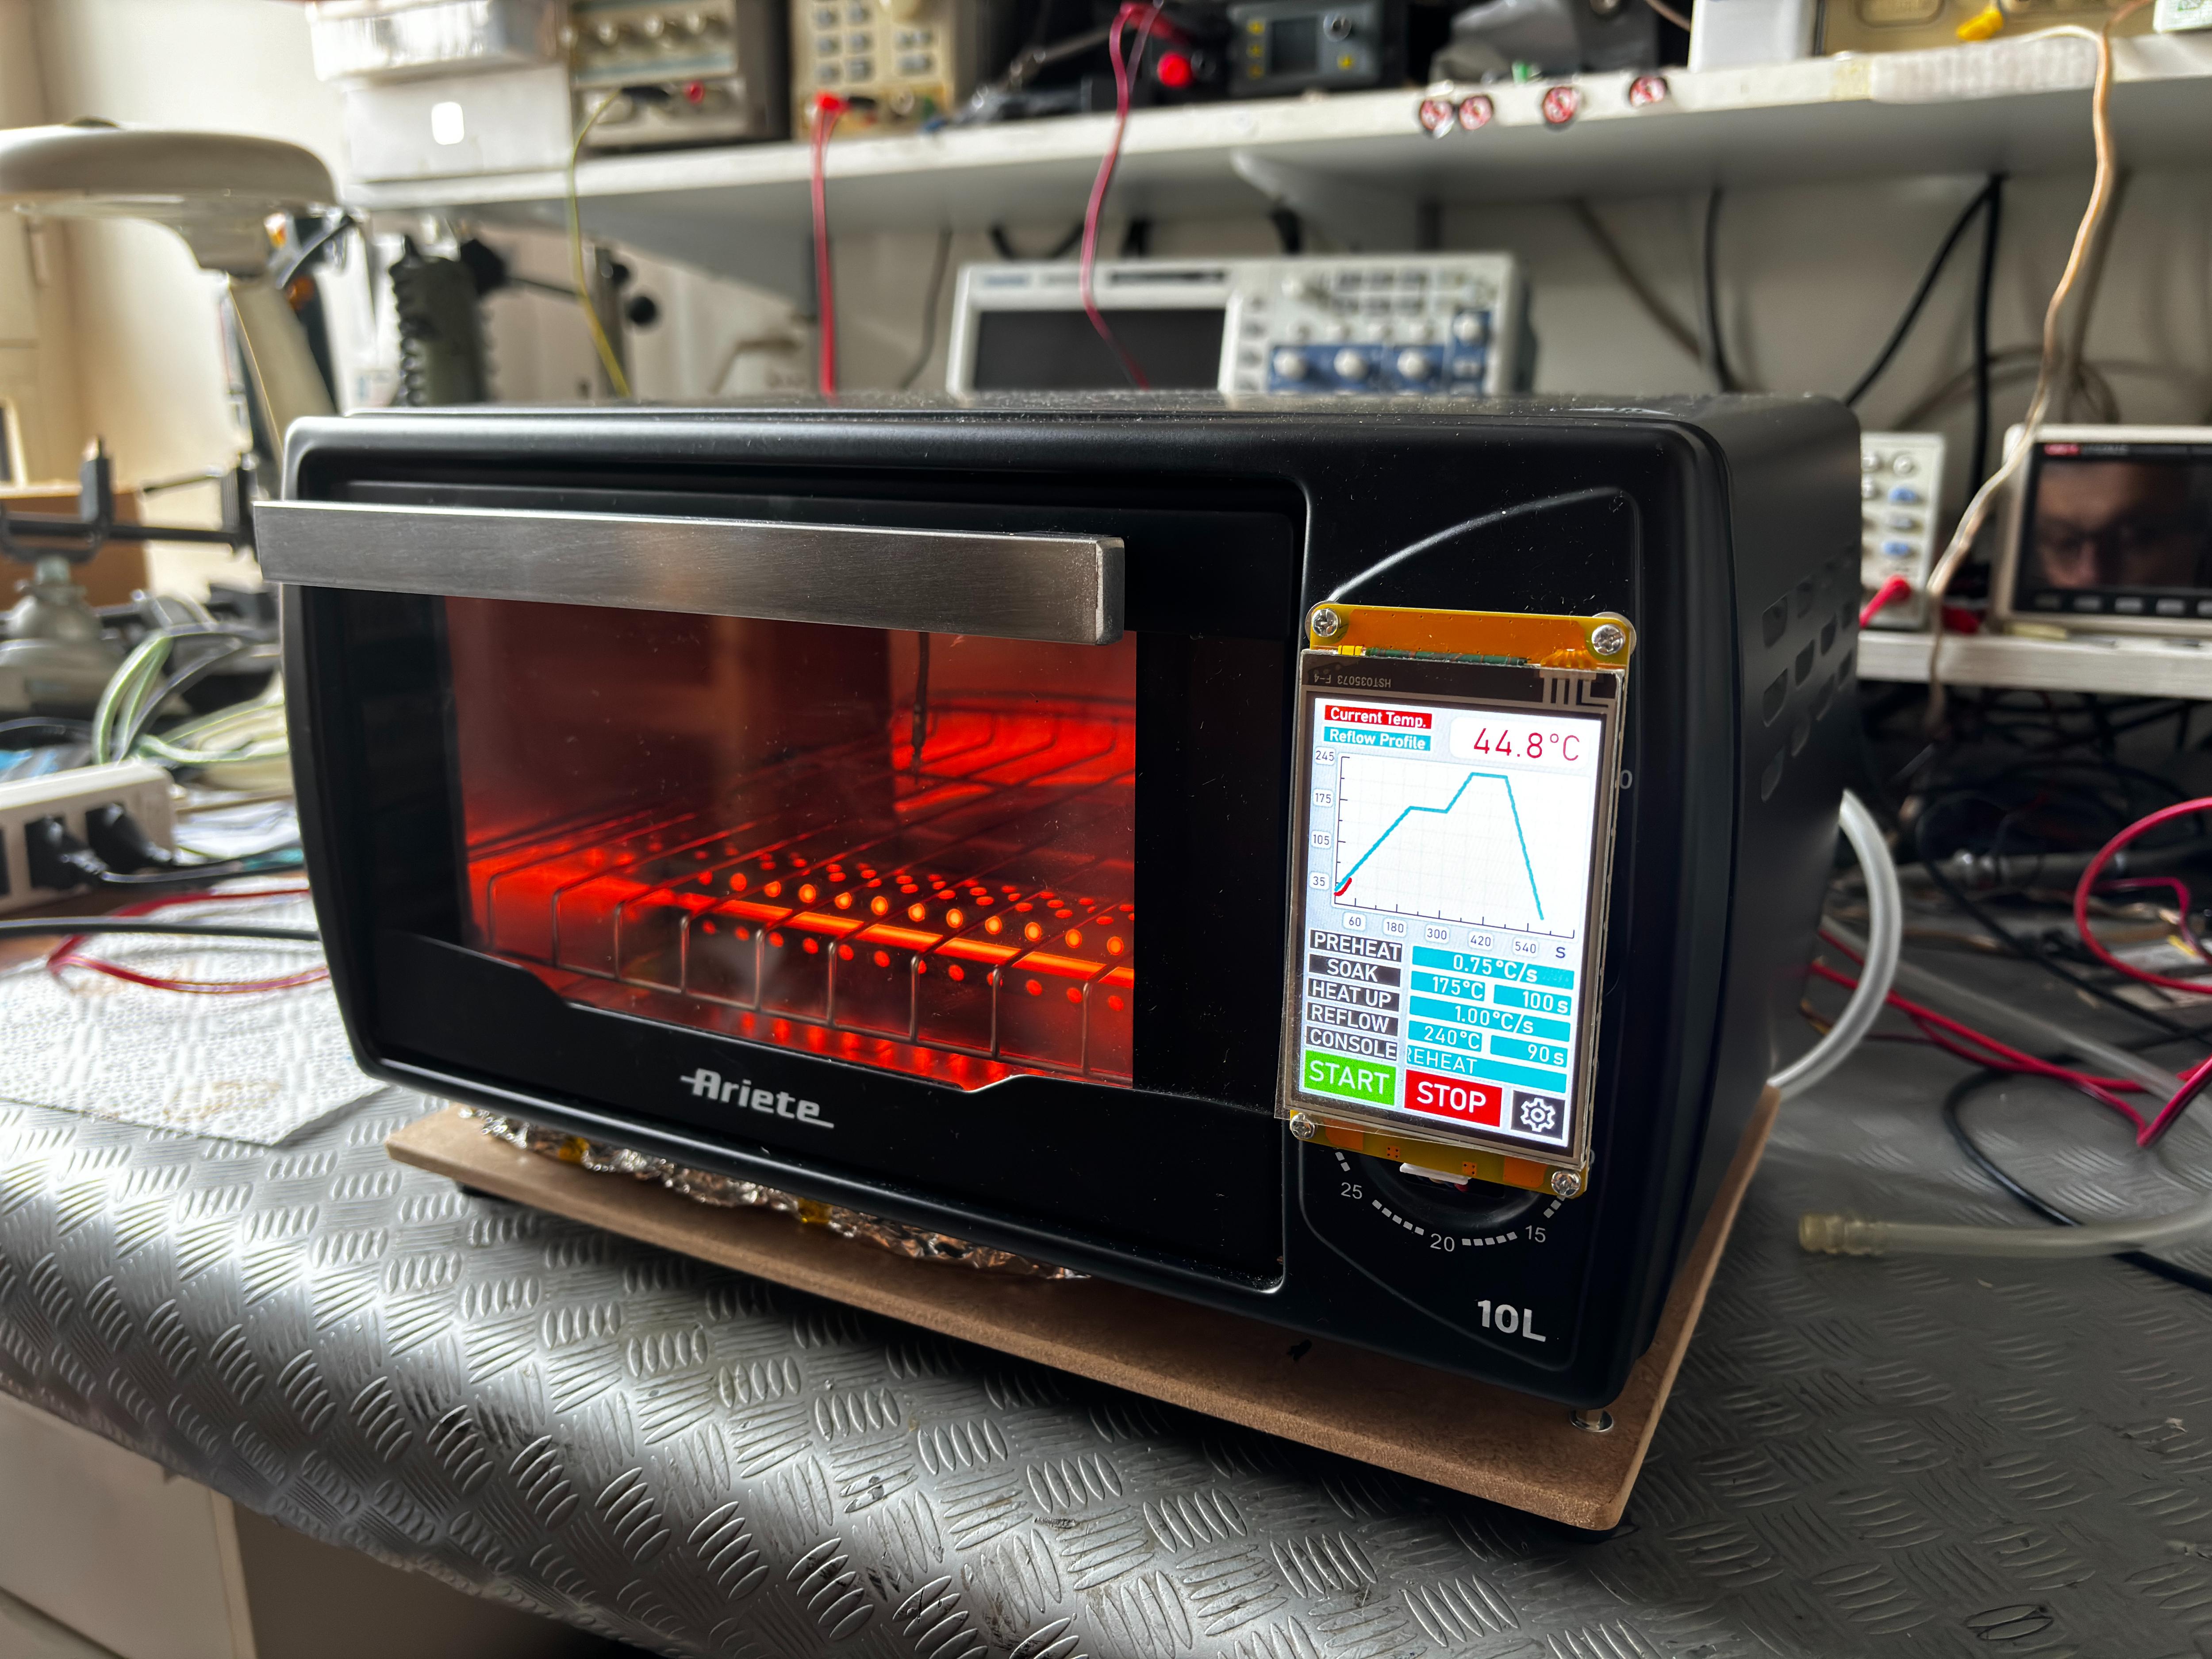 YARO (Yet Another Reflow Oven)